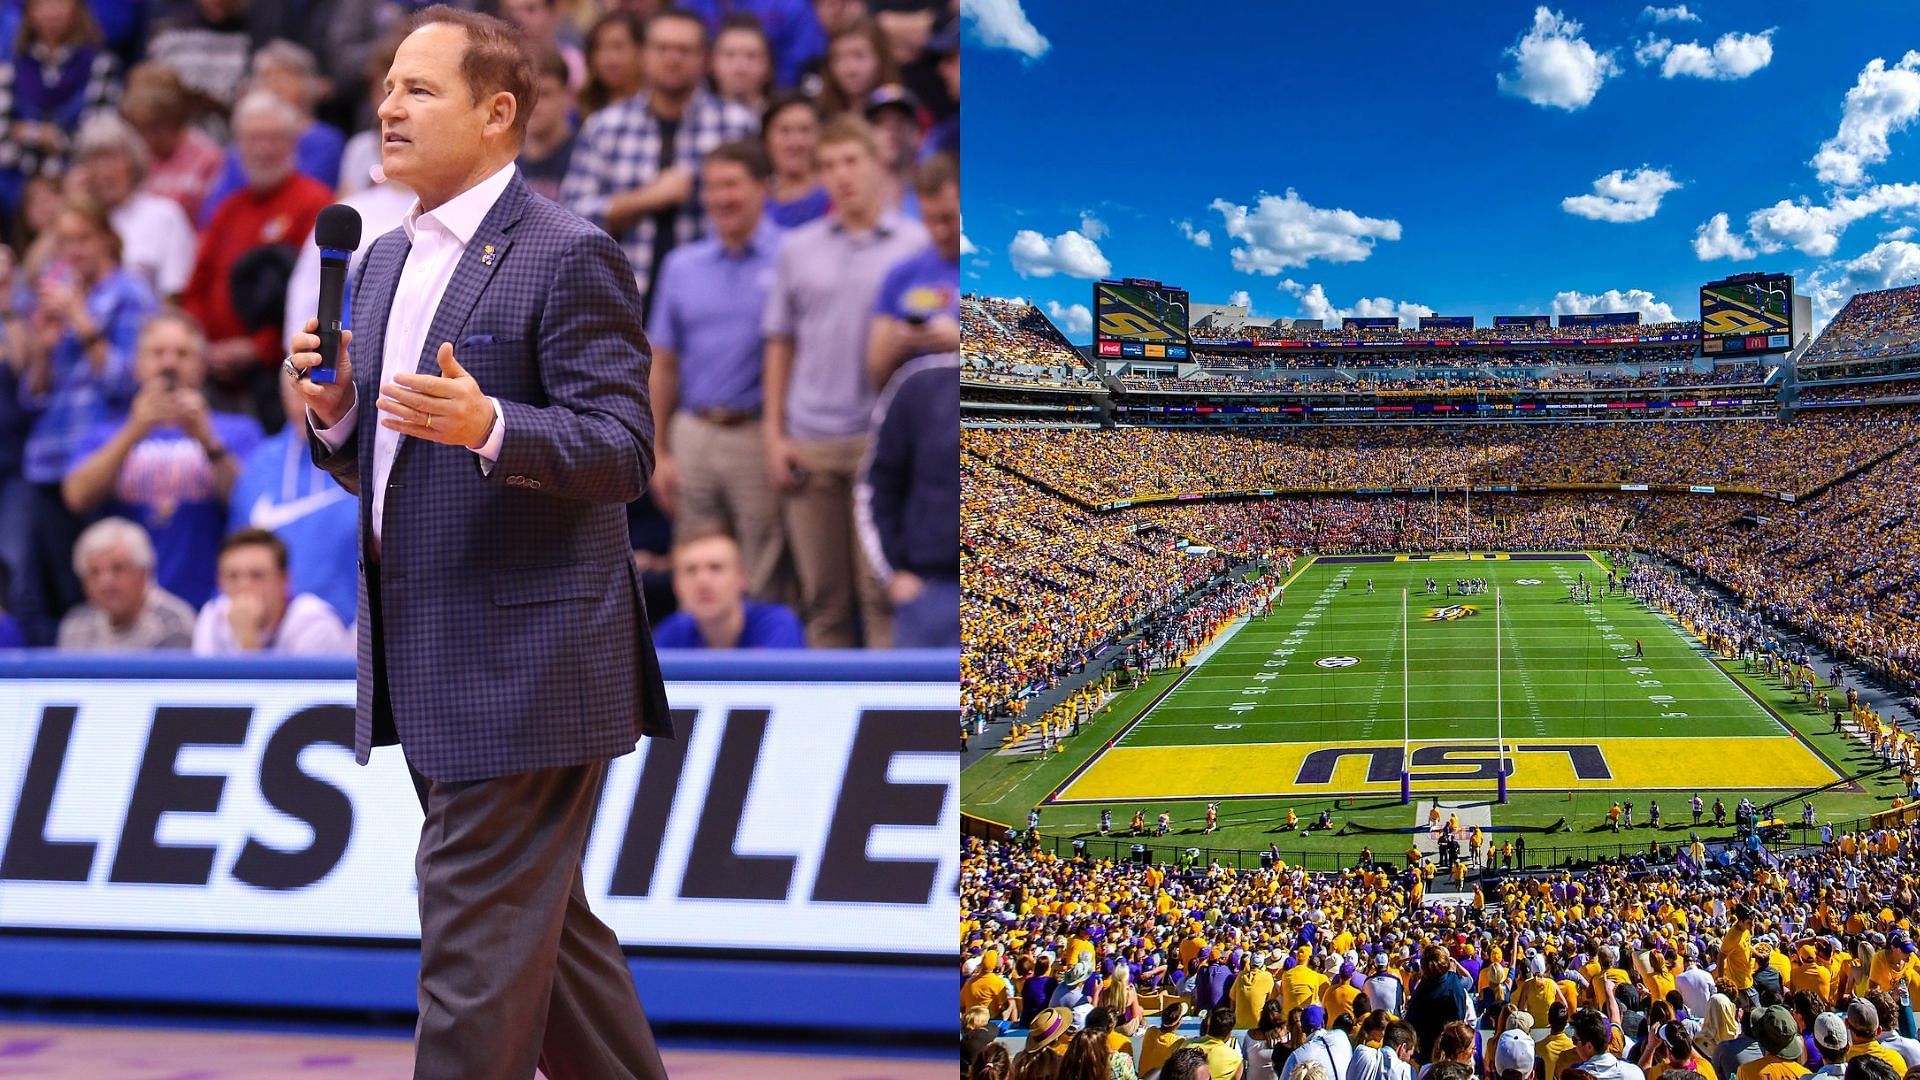 Images courtesy of Les Miles